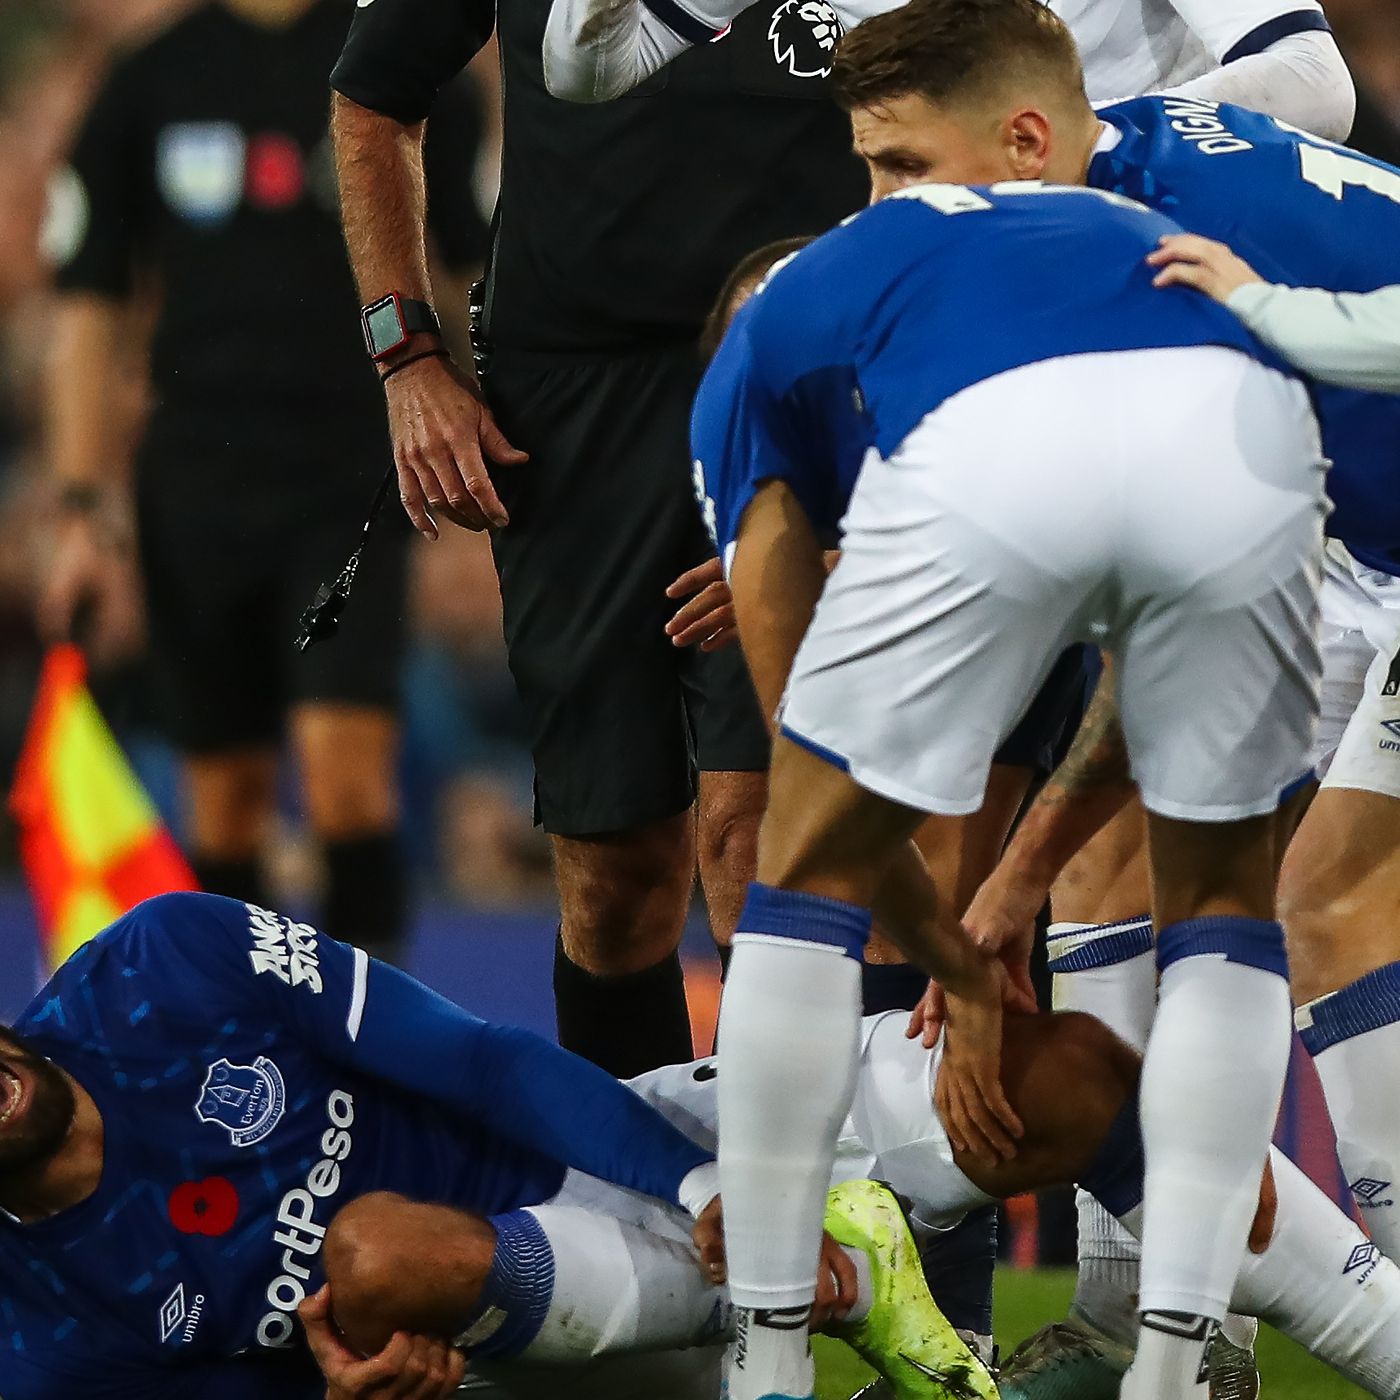 Bourgeon gordijn parachute Sympathy should lie solely with André Gomes after dreadful injury - Royal  Blue Mersey